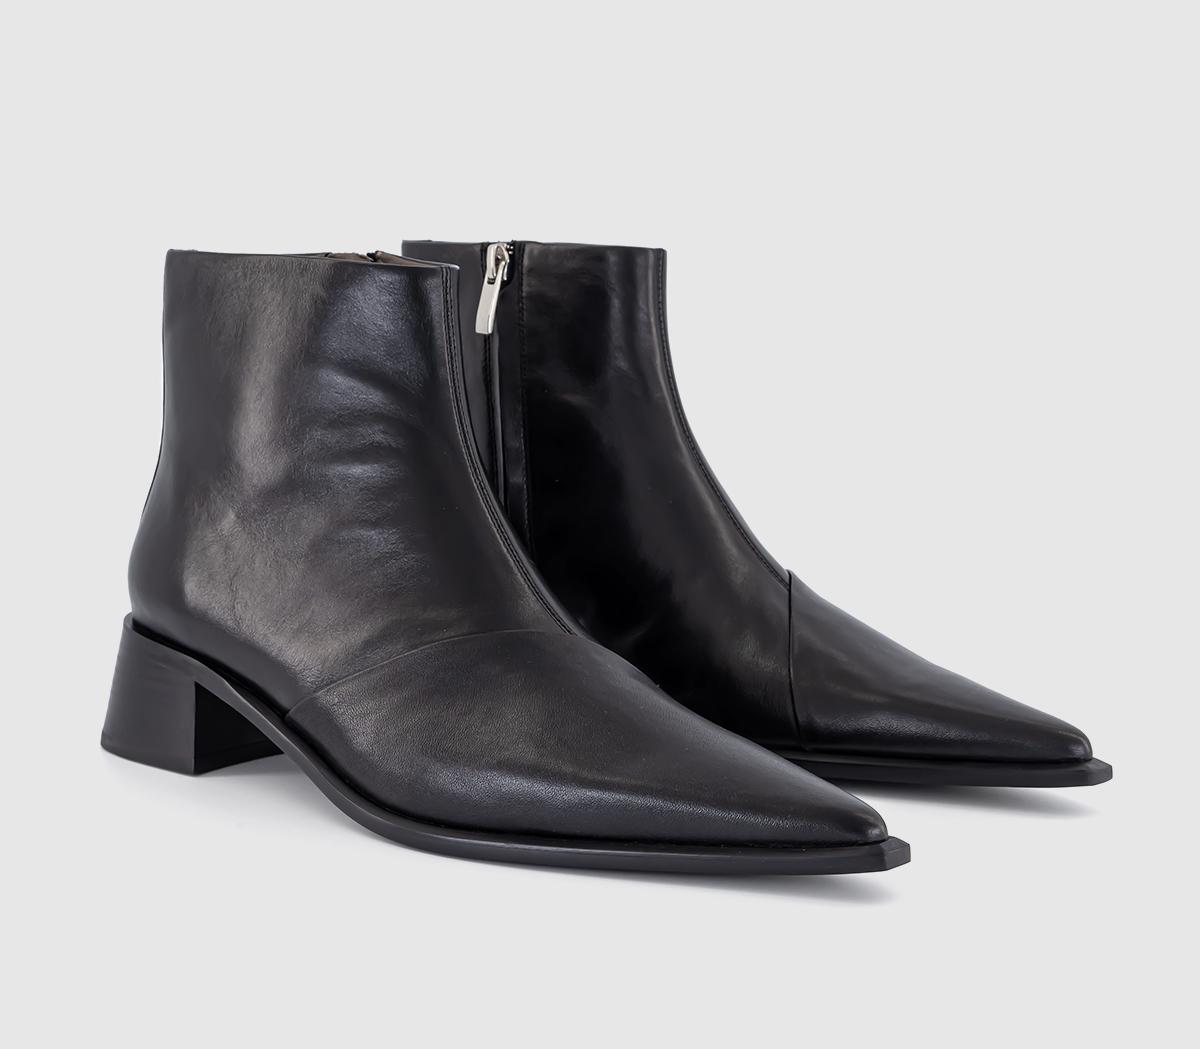 Atelier by Vagabond Samira Ankle Boots Black - Women's Ankle Boots